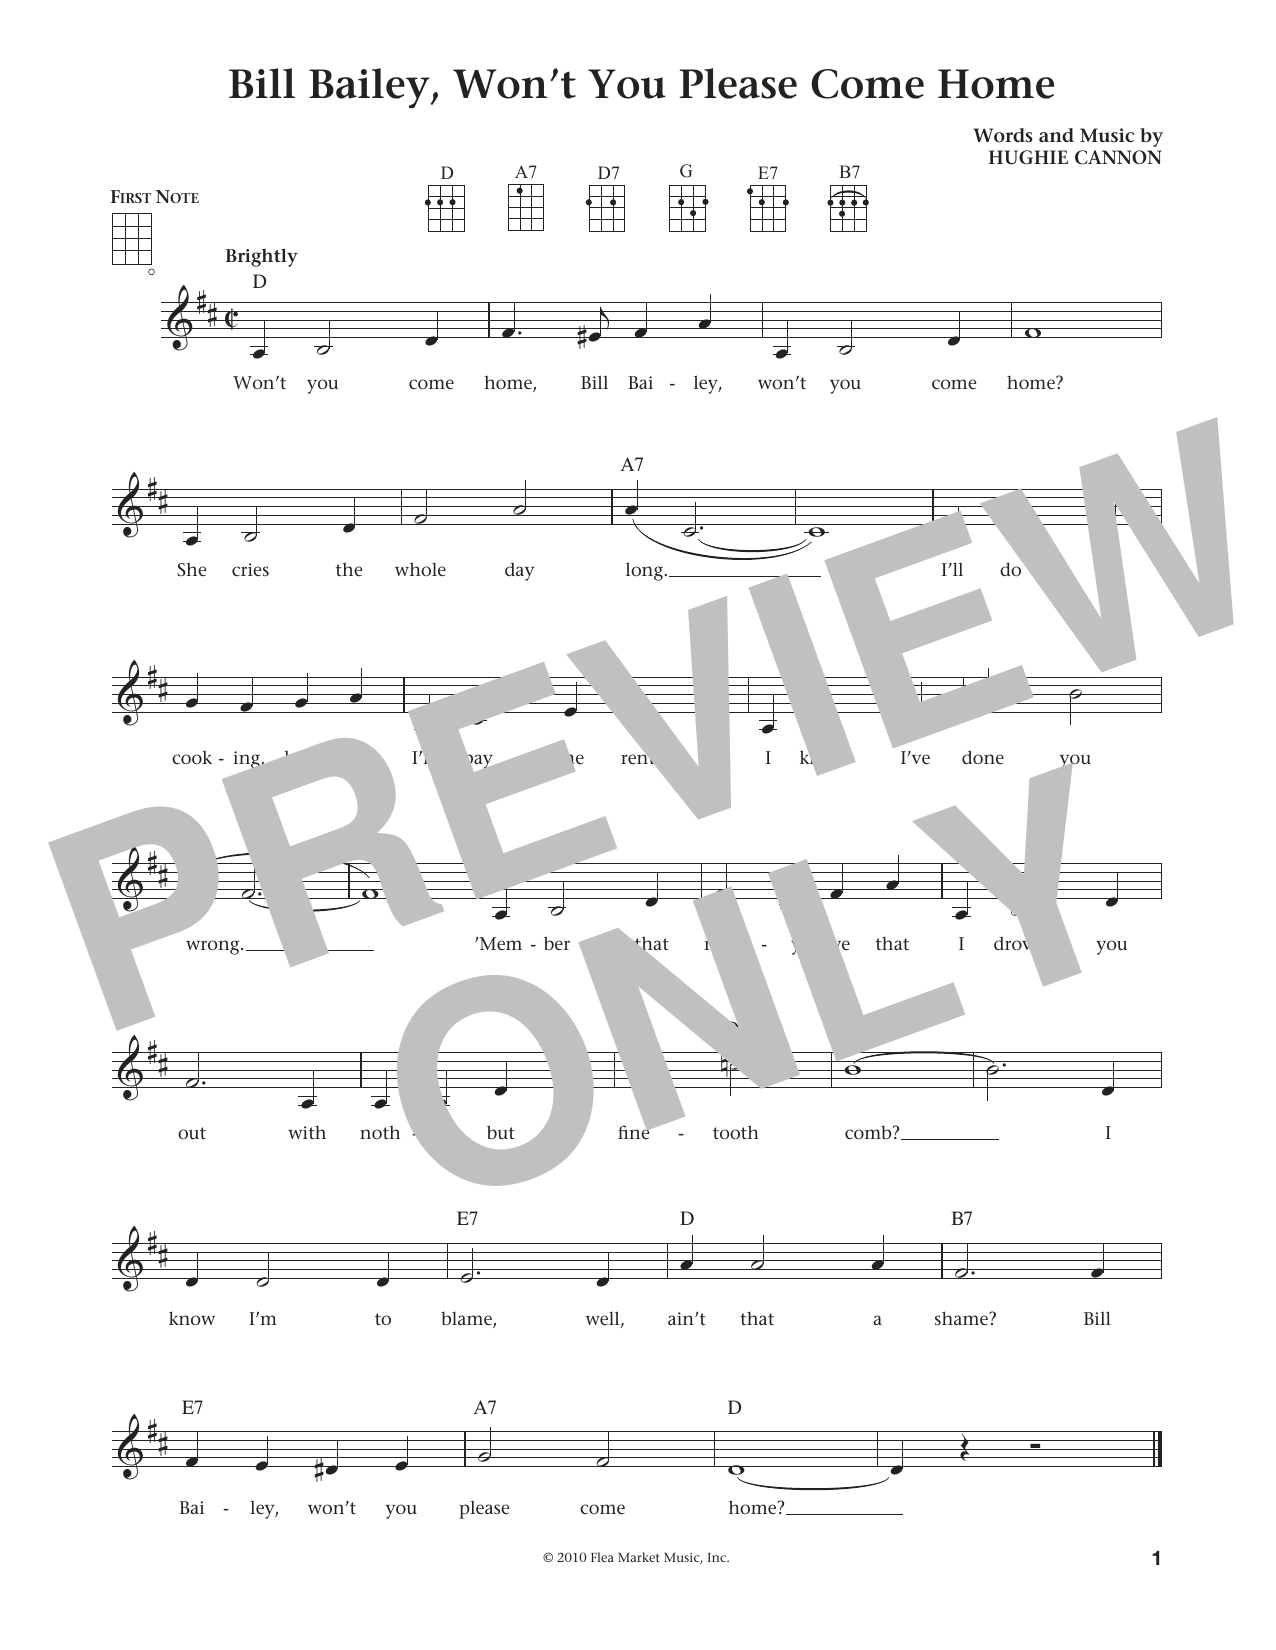 Download Hughie Cannon Bill Bailey, Won't You Please Come Home Sheet Music